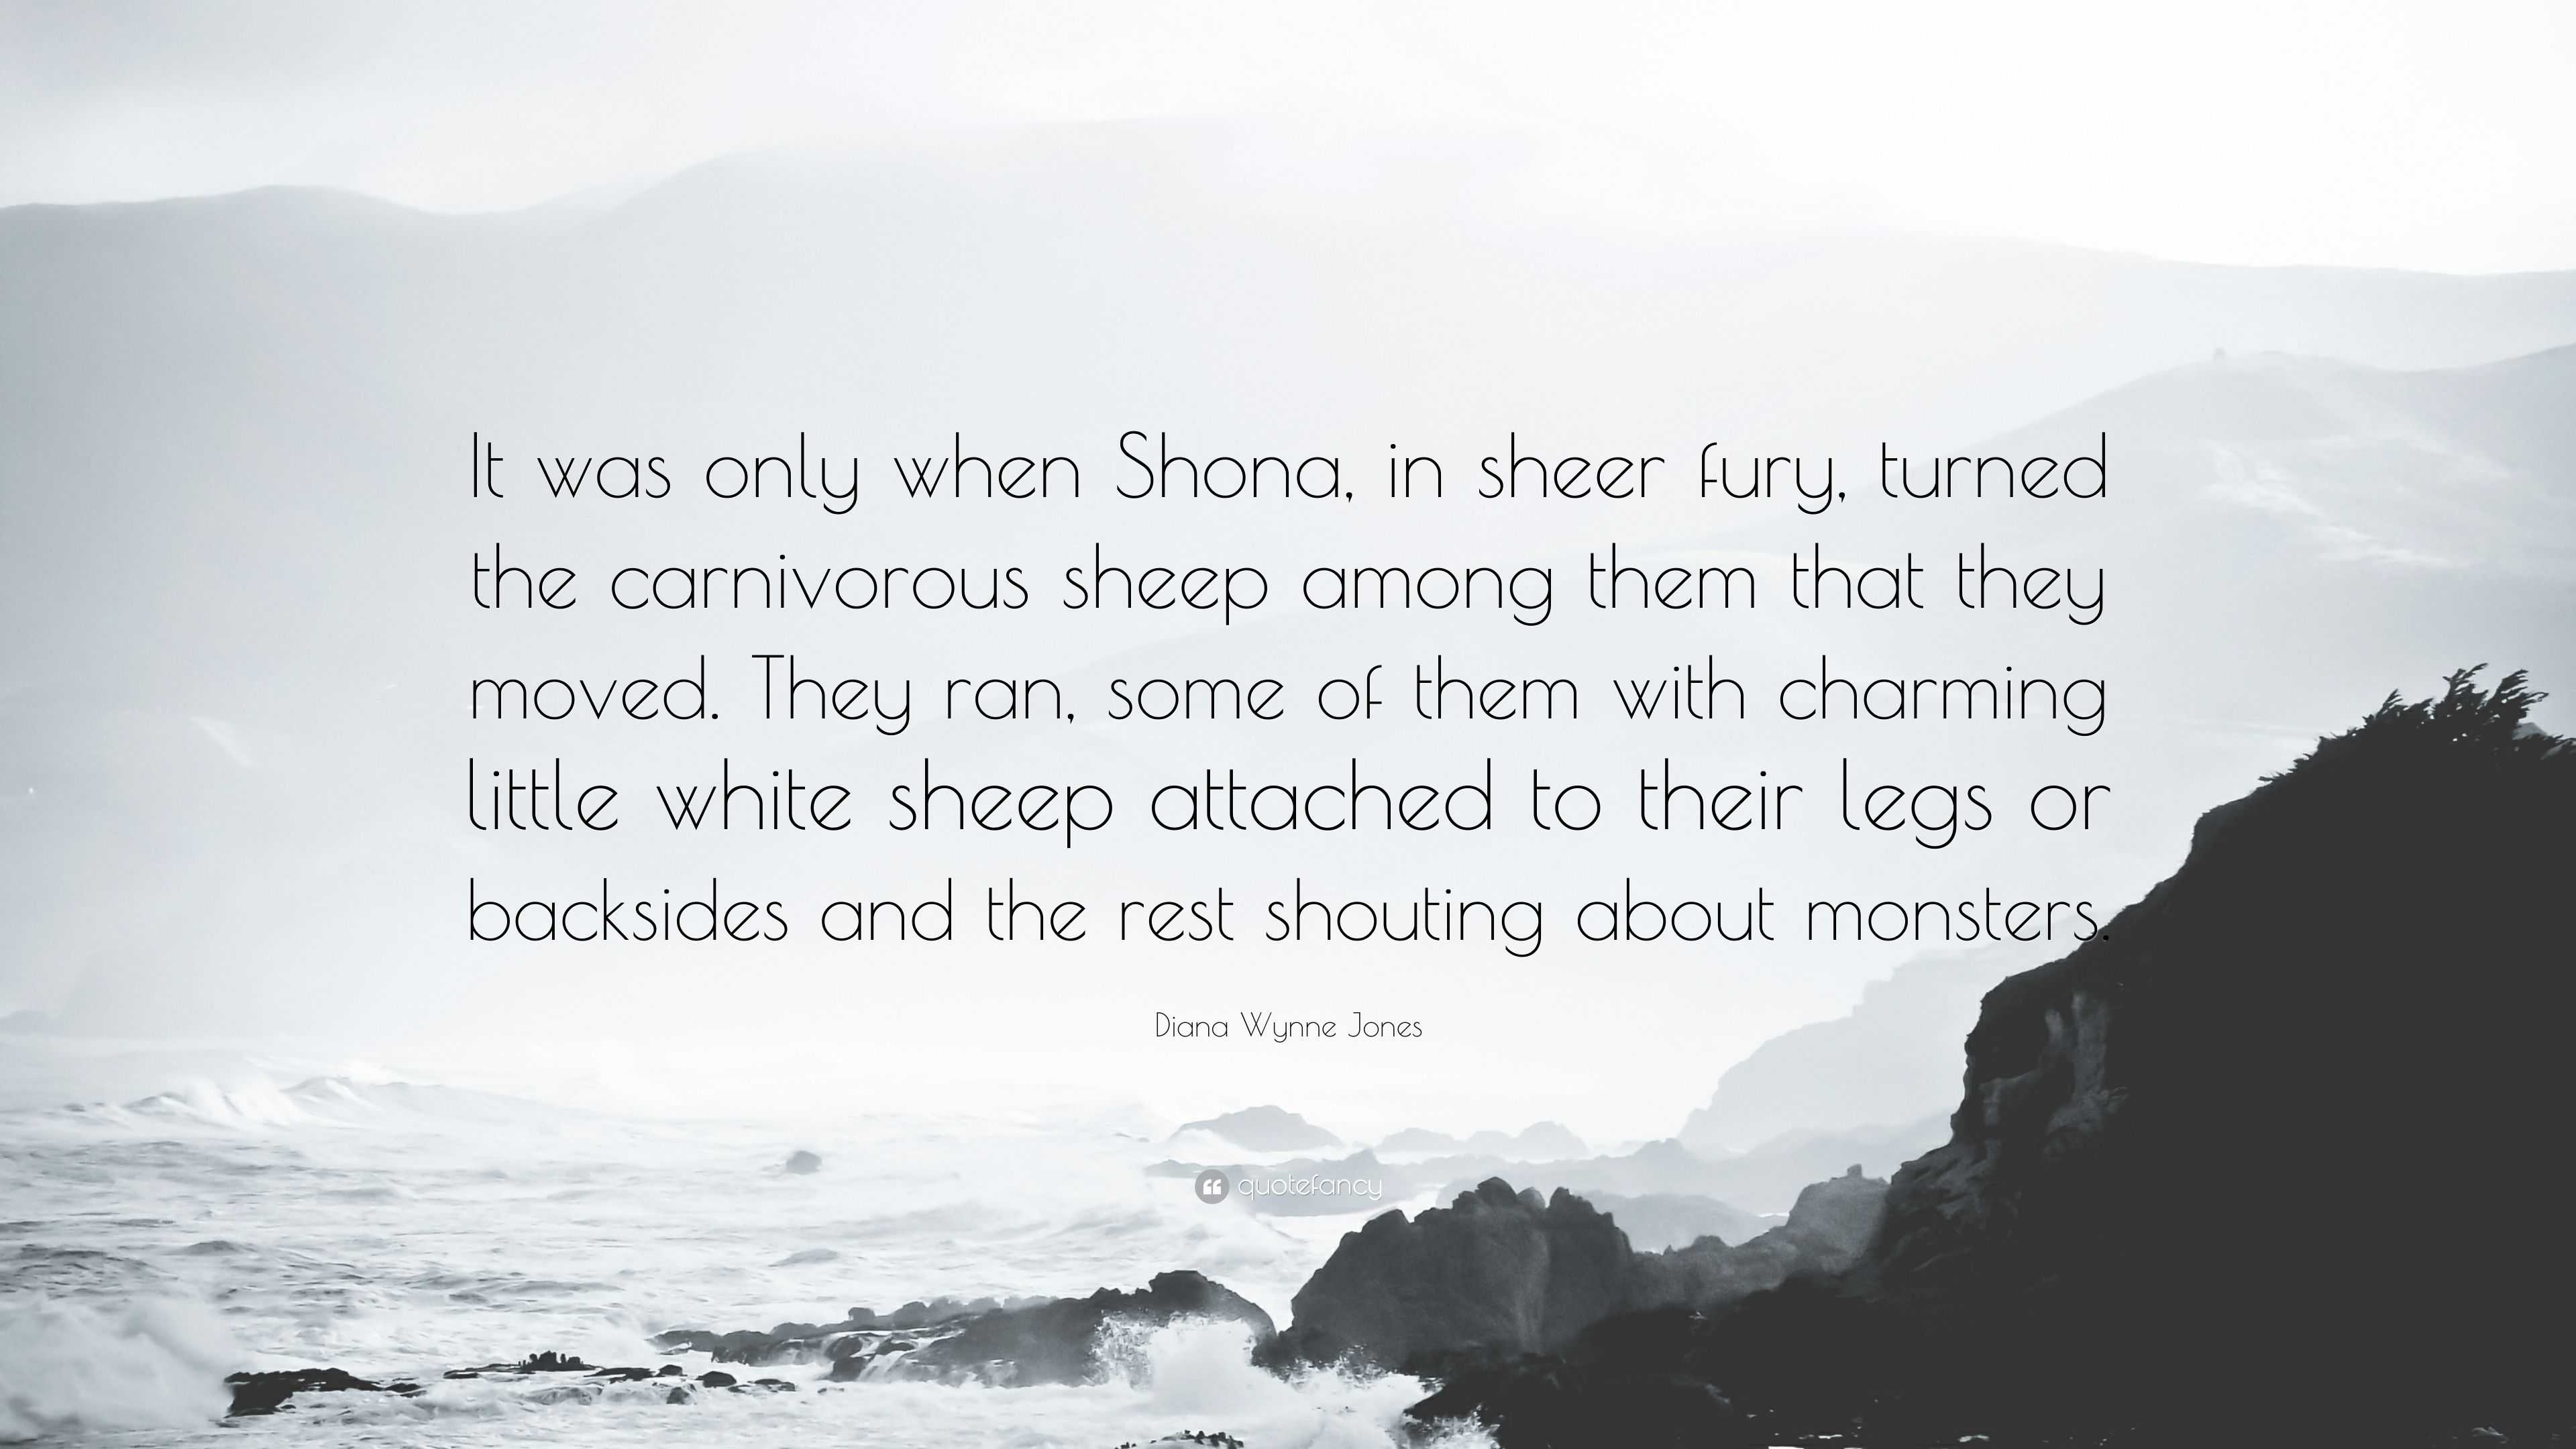 Diana Wynne Jones Quote: “It was only when Shona, in sheer fury, turned the  carnivorous sheep among them that they moved. They ran, some of them w”